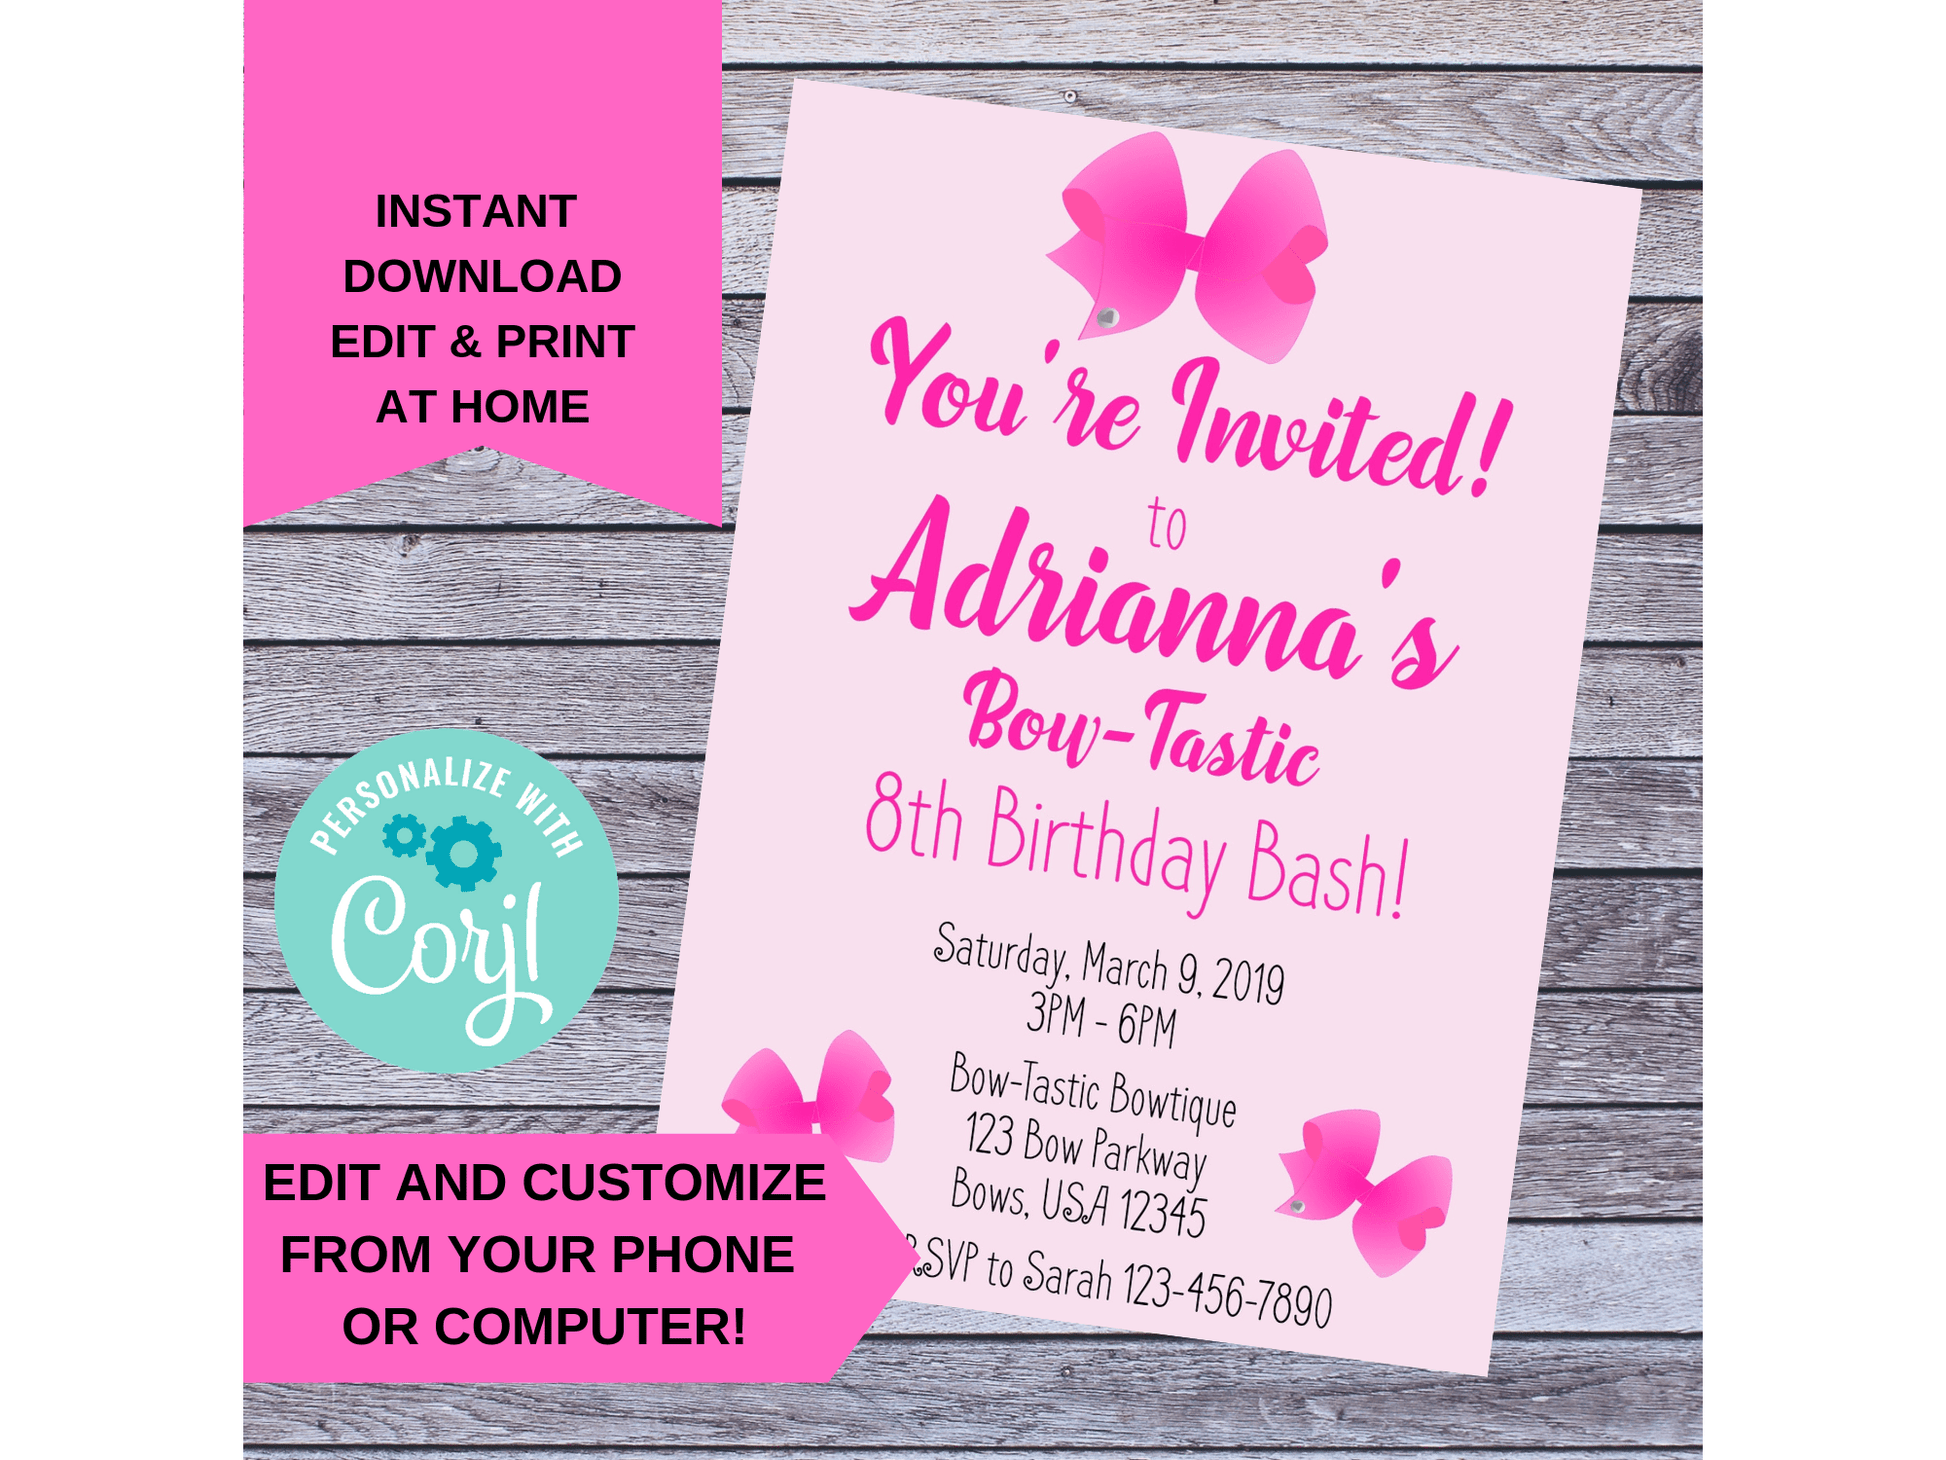 Pretty in Pink Bow Bow-Tastic Birthday Party Invitation for Girls